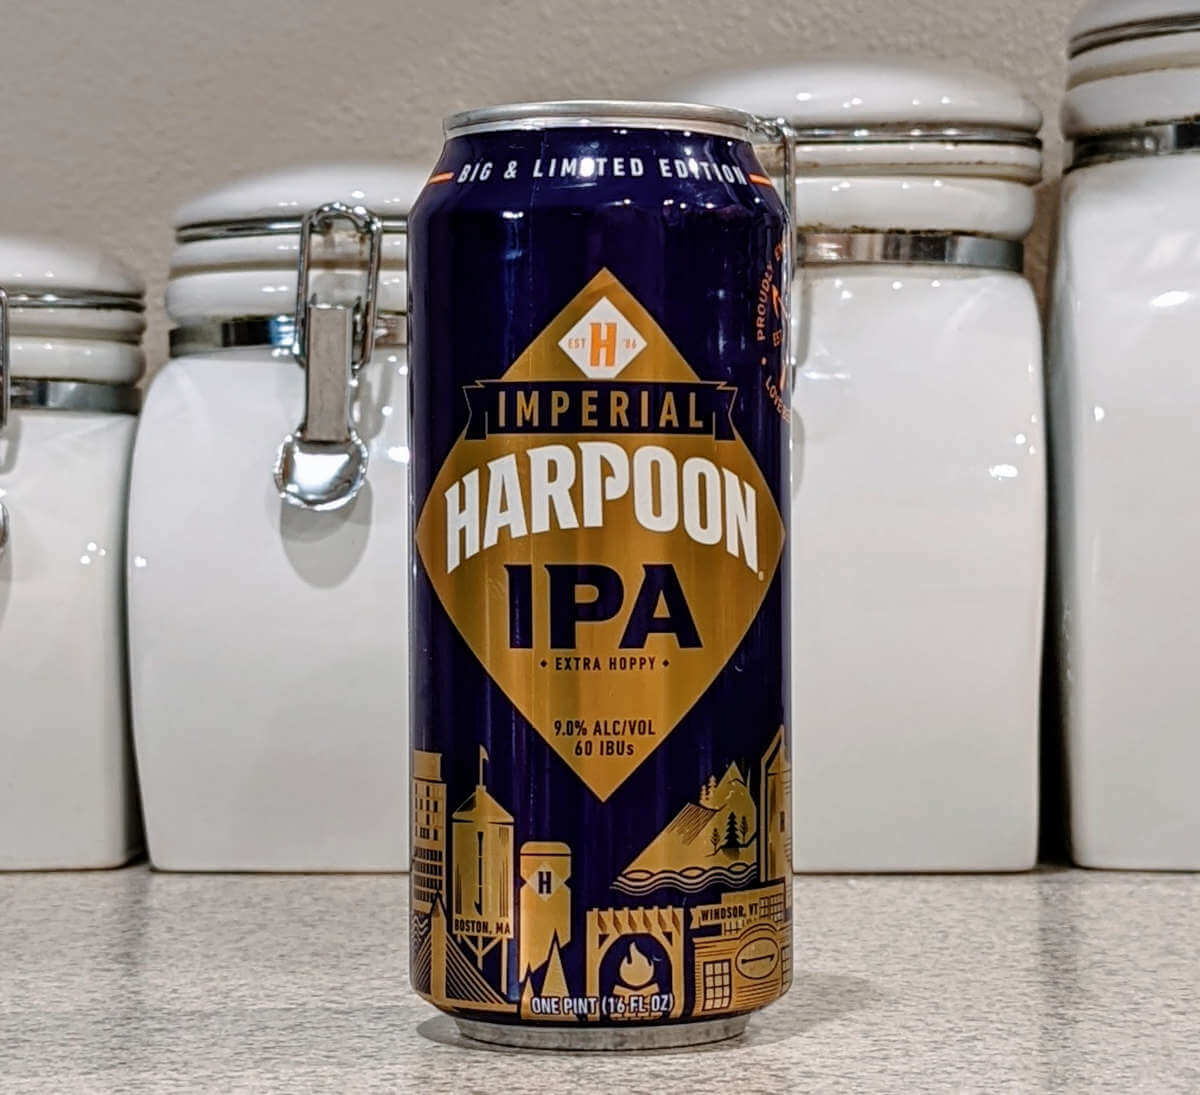 Received: Imperial Harpoon IPA